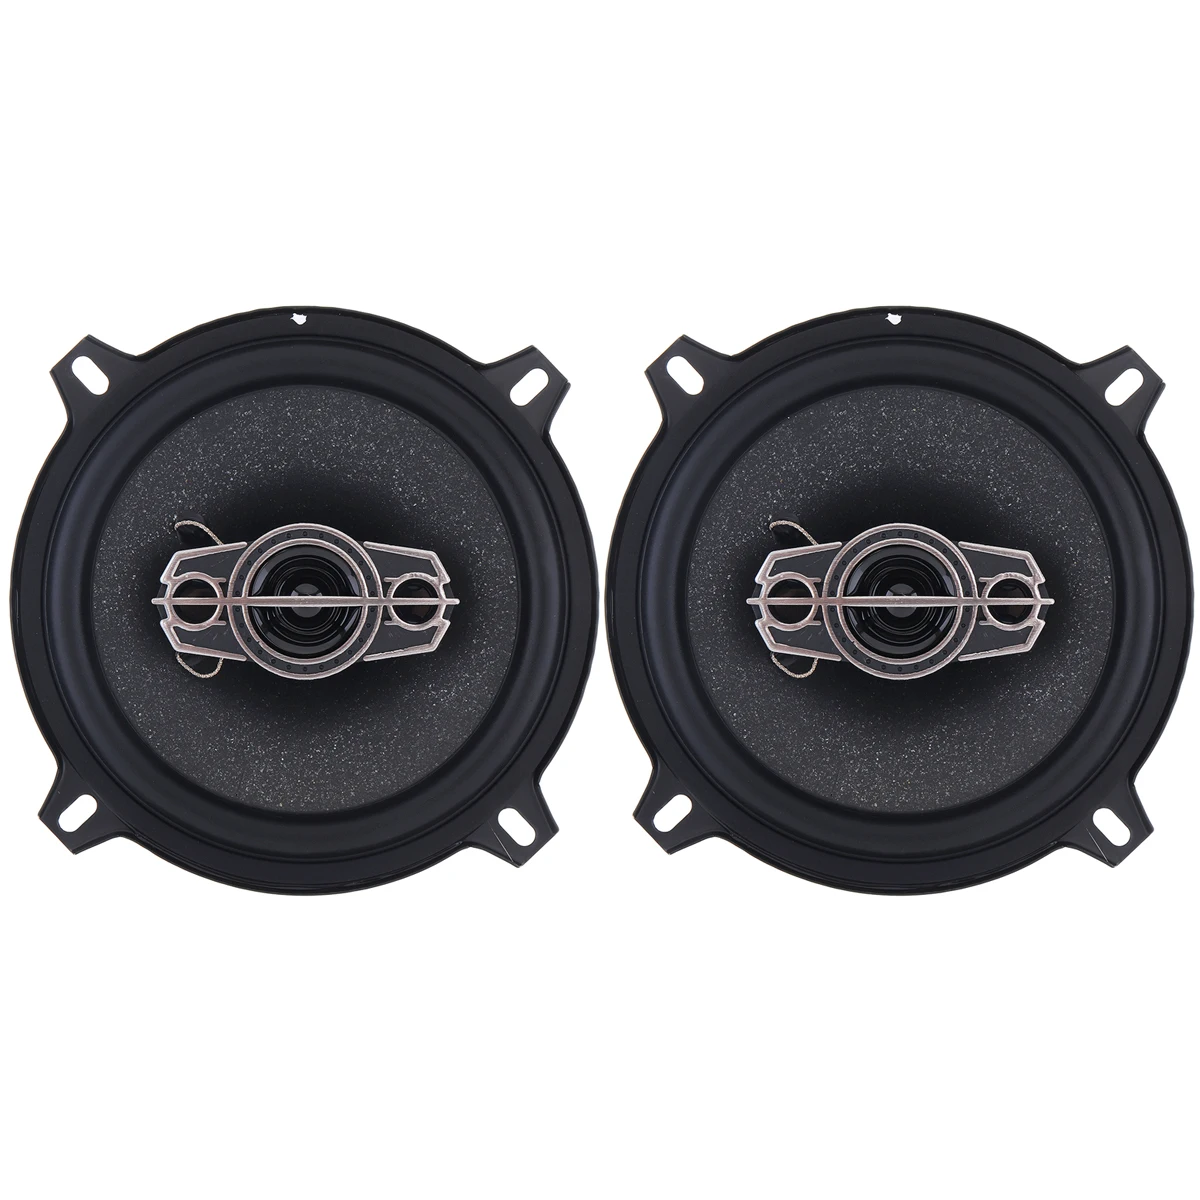 sourcing map 110dB 2W 8 Ohm Built In Car Speaker Stereo Audio Dome Tweeter Speakers 2pcs 